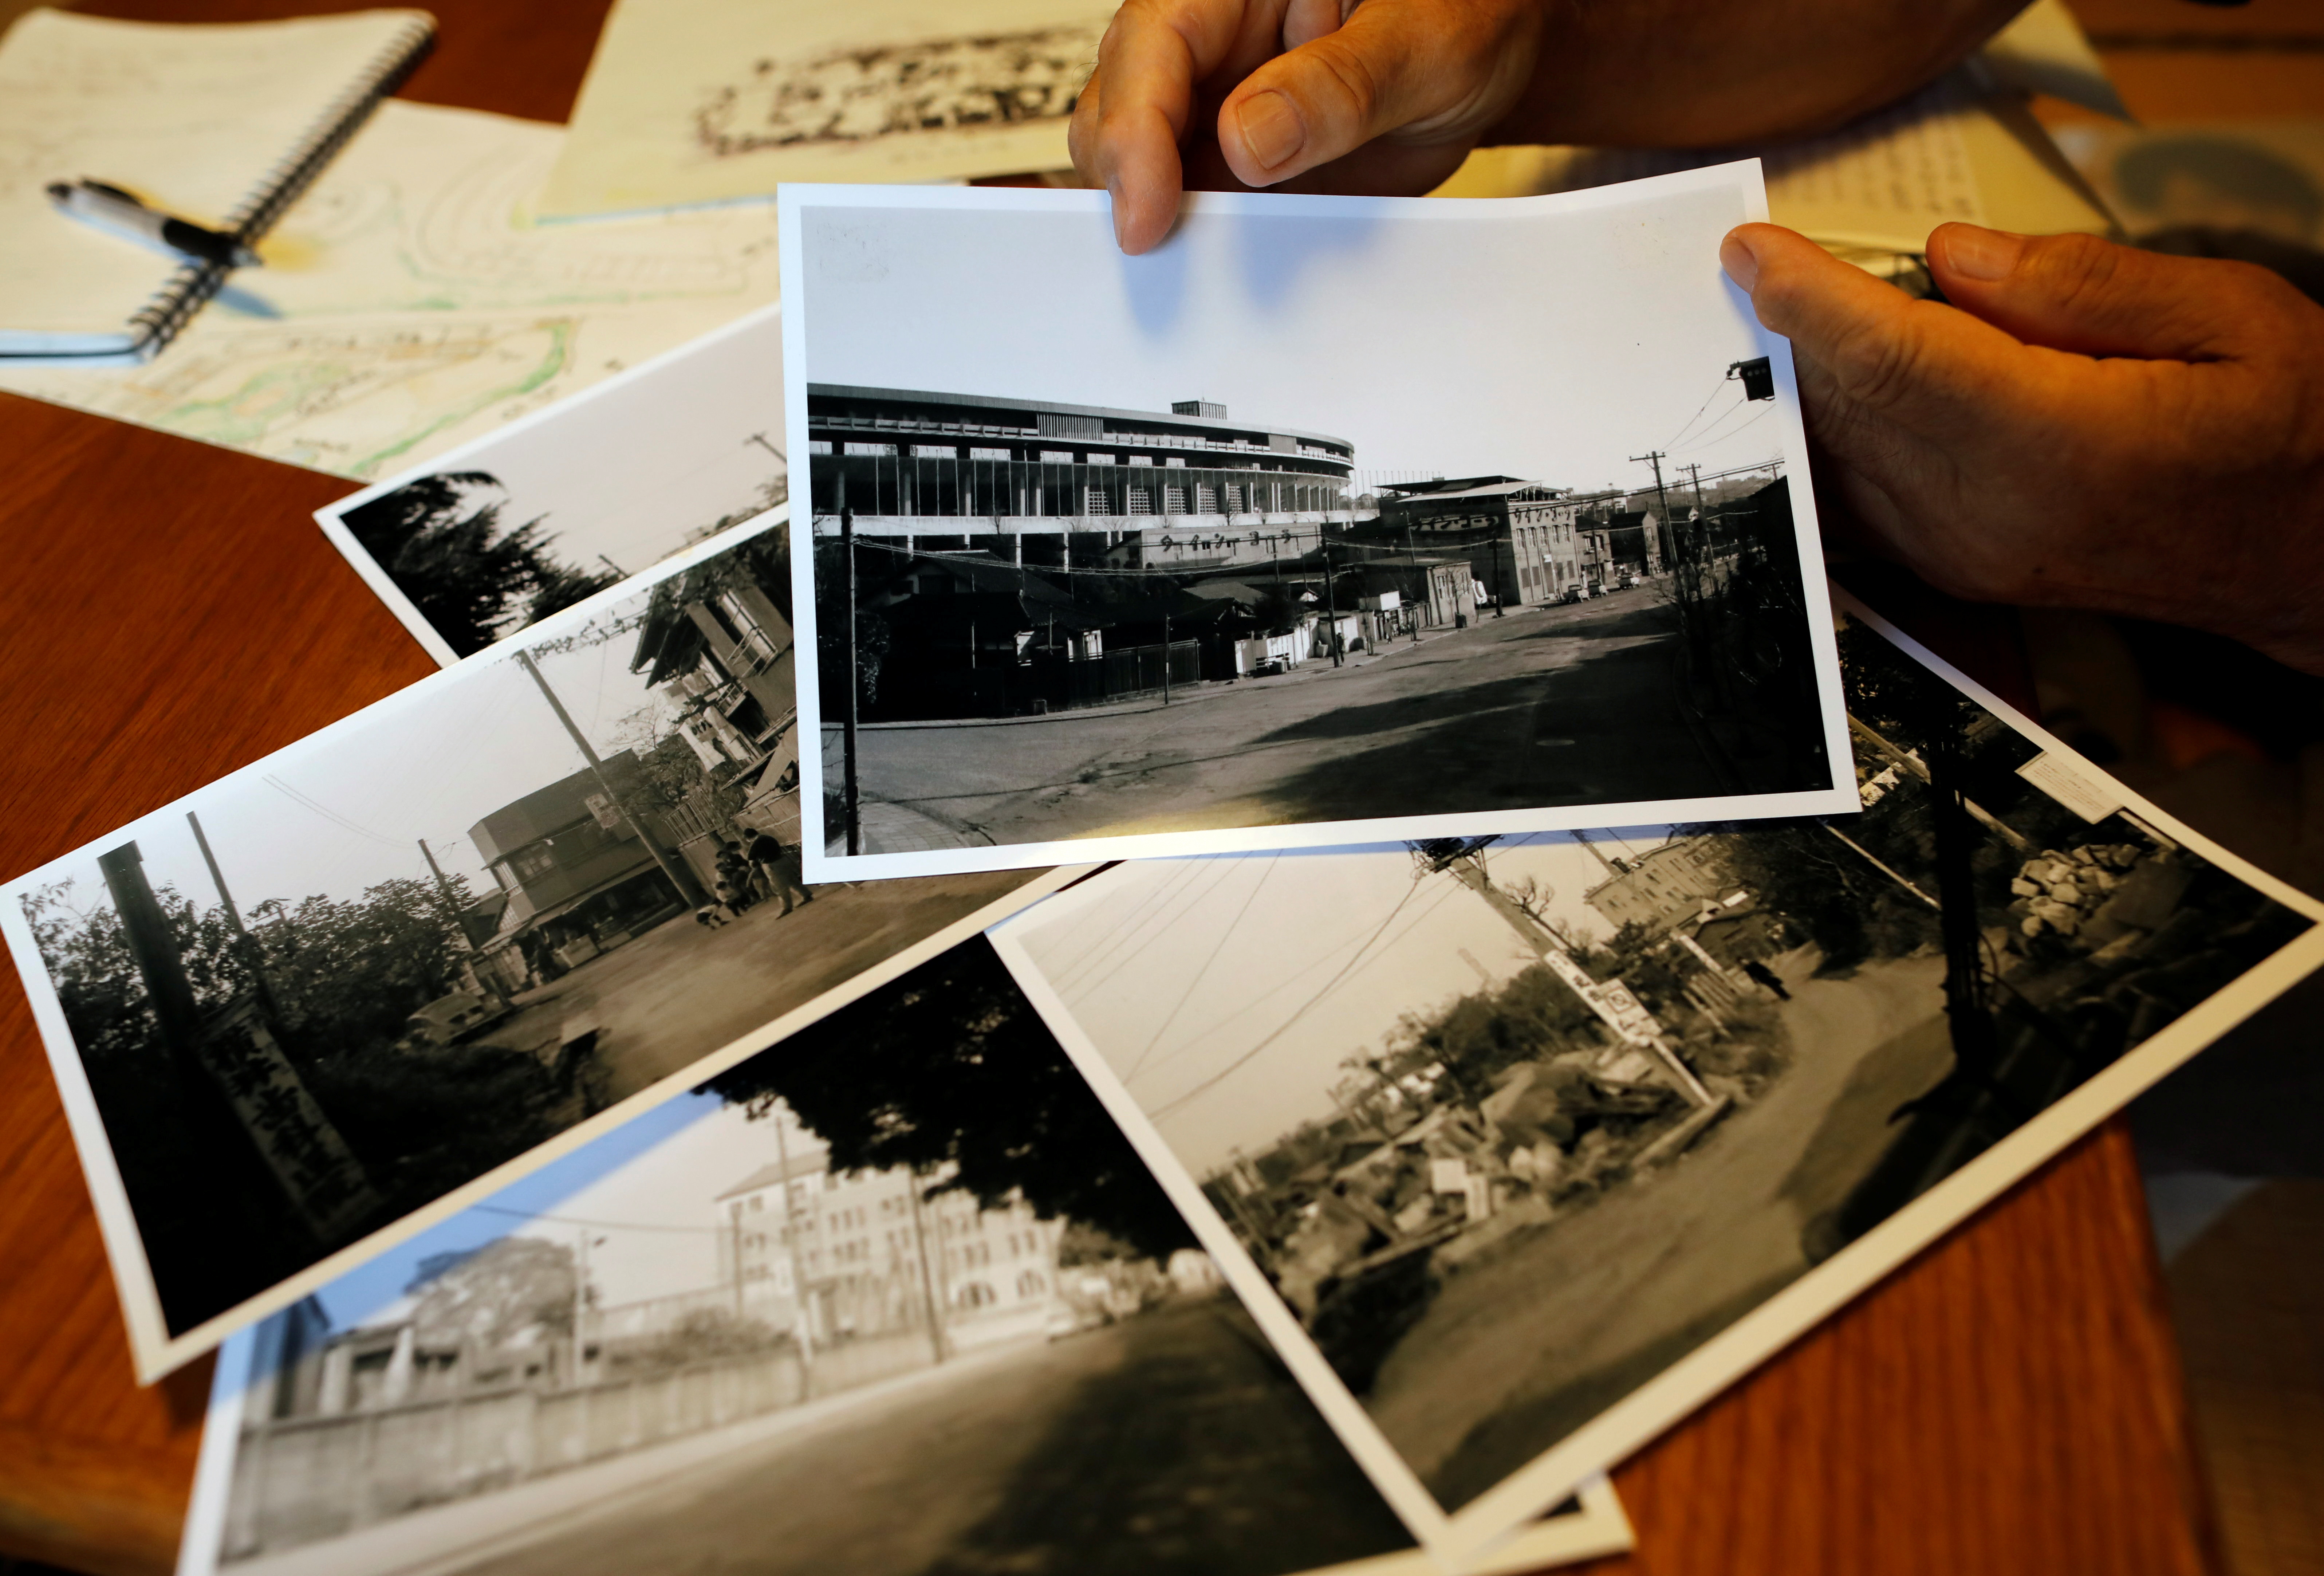 Kohei Jinno shows his old photos of previous national stadium neighboring at his house in Tokyo